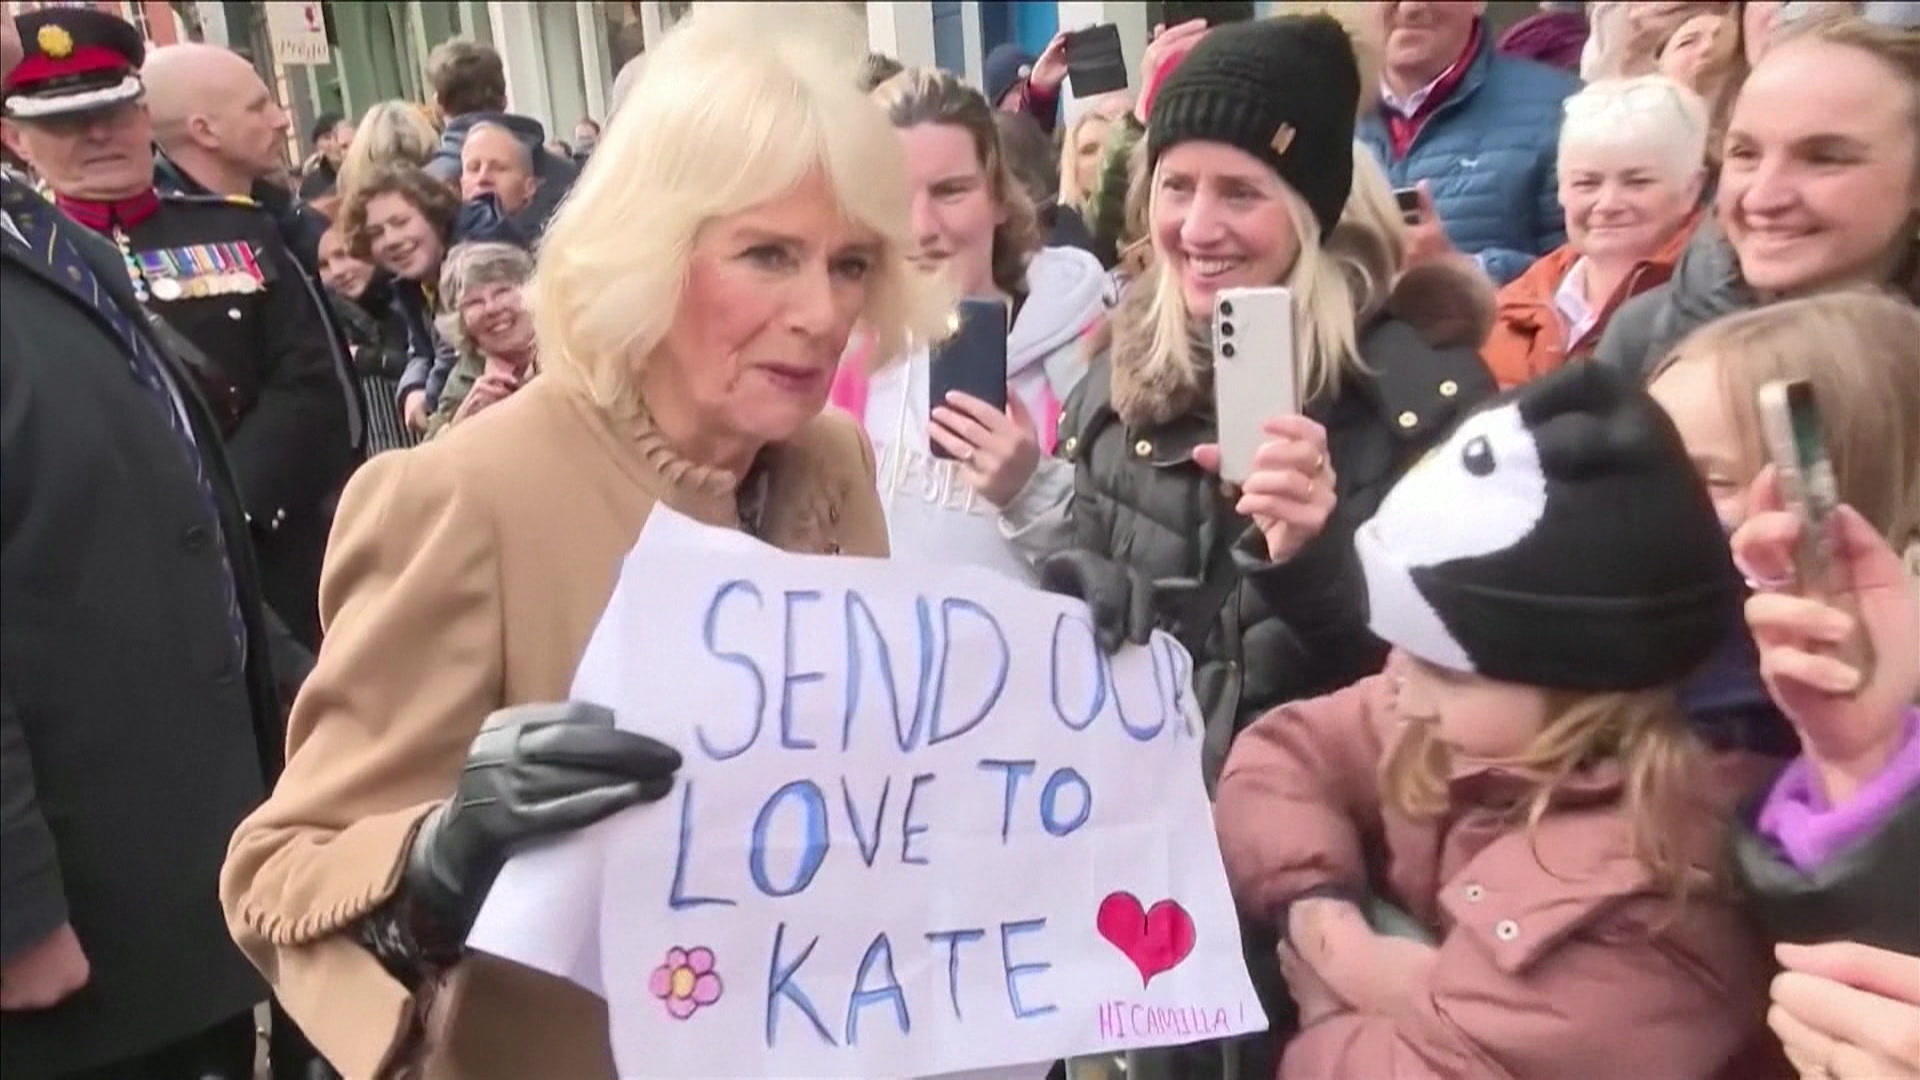 Moving well wishes for Princess Kate This is how Queen Camilla reacts